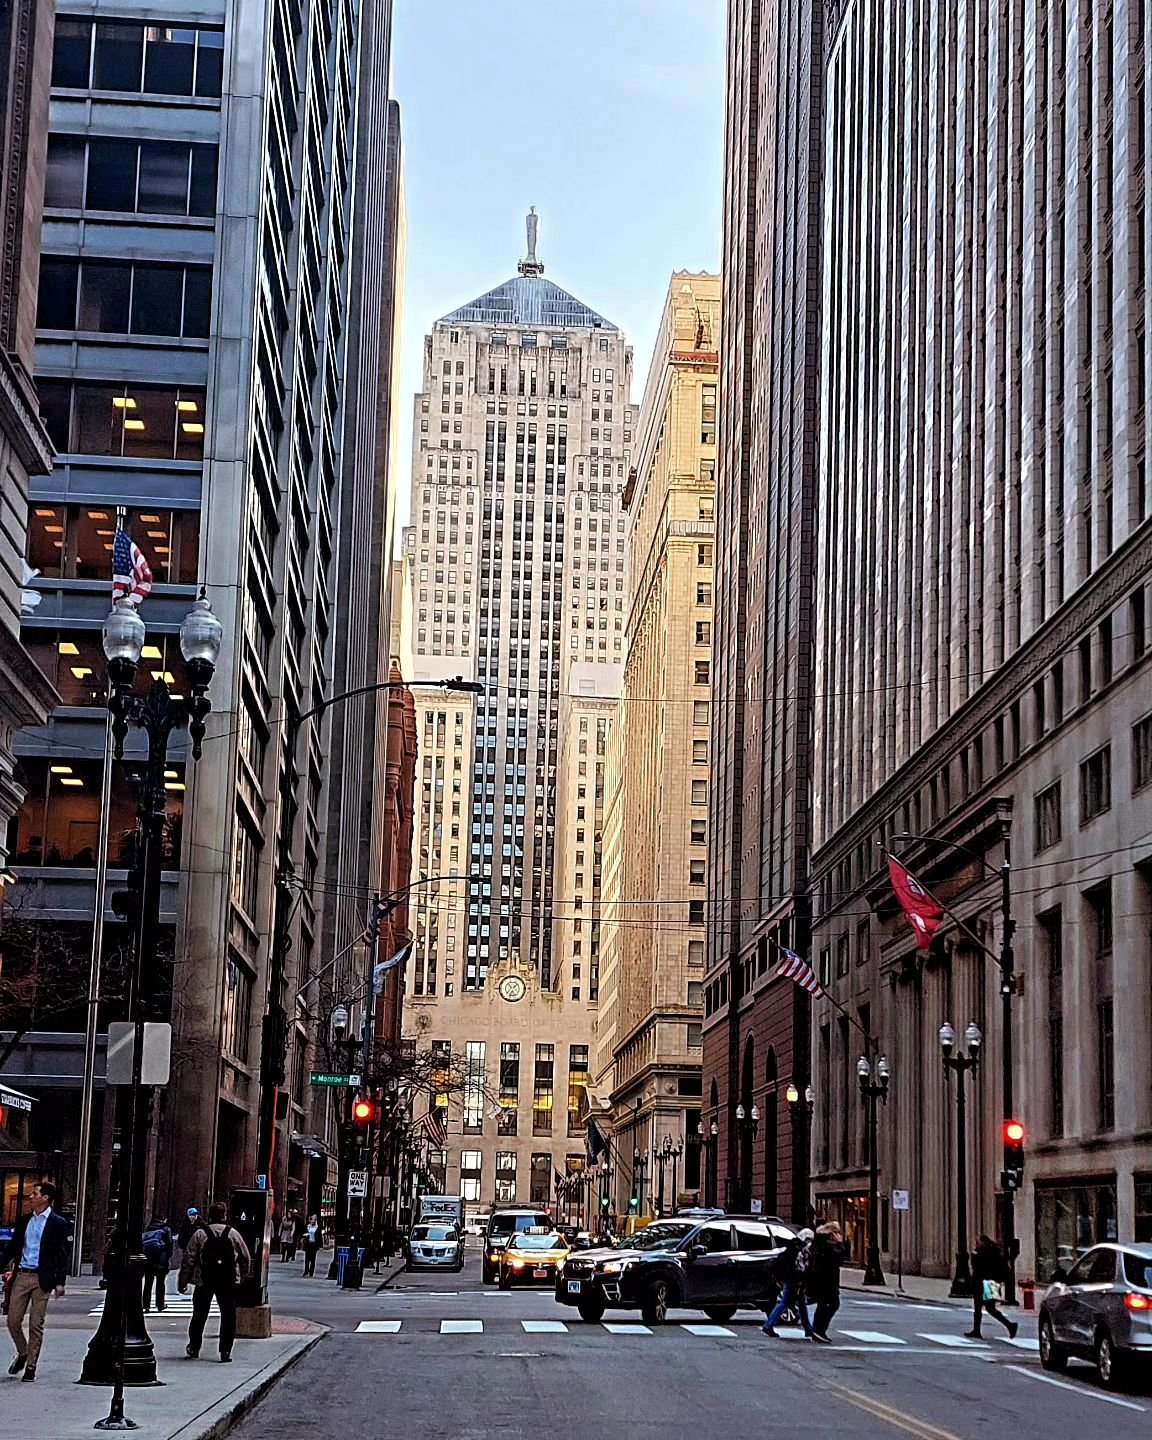 Meetings this morning brought me past the beautiful Chicago Board of Trade Building.

The story ...

Home to the world's oldest futures and options exchange, this is a 44-storey Art Deco skyscraper at the foot of the La Salle Street canyon in Chicago